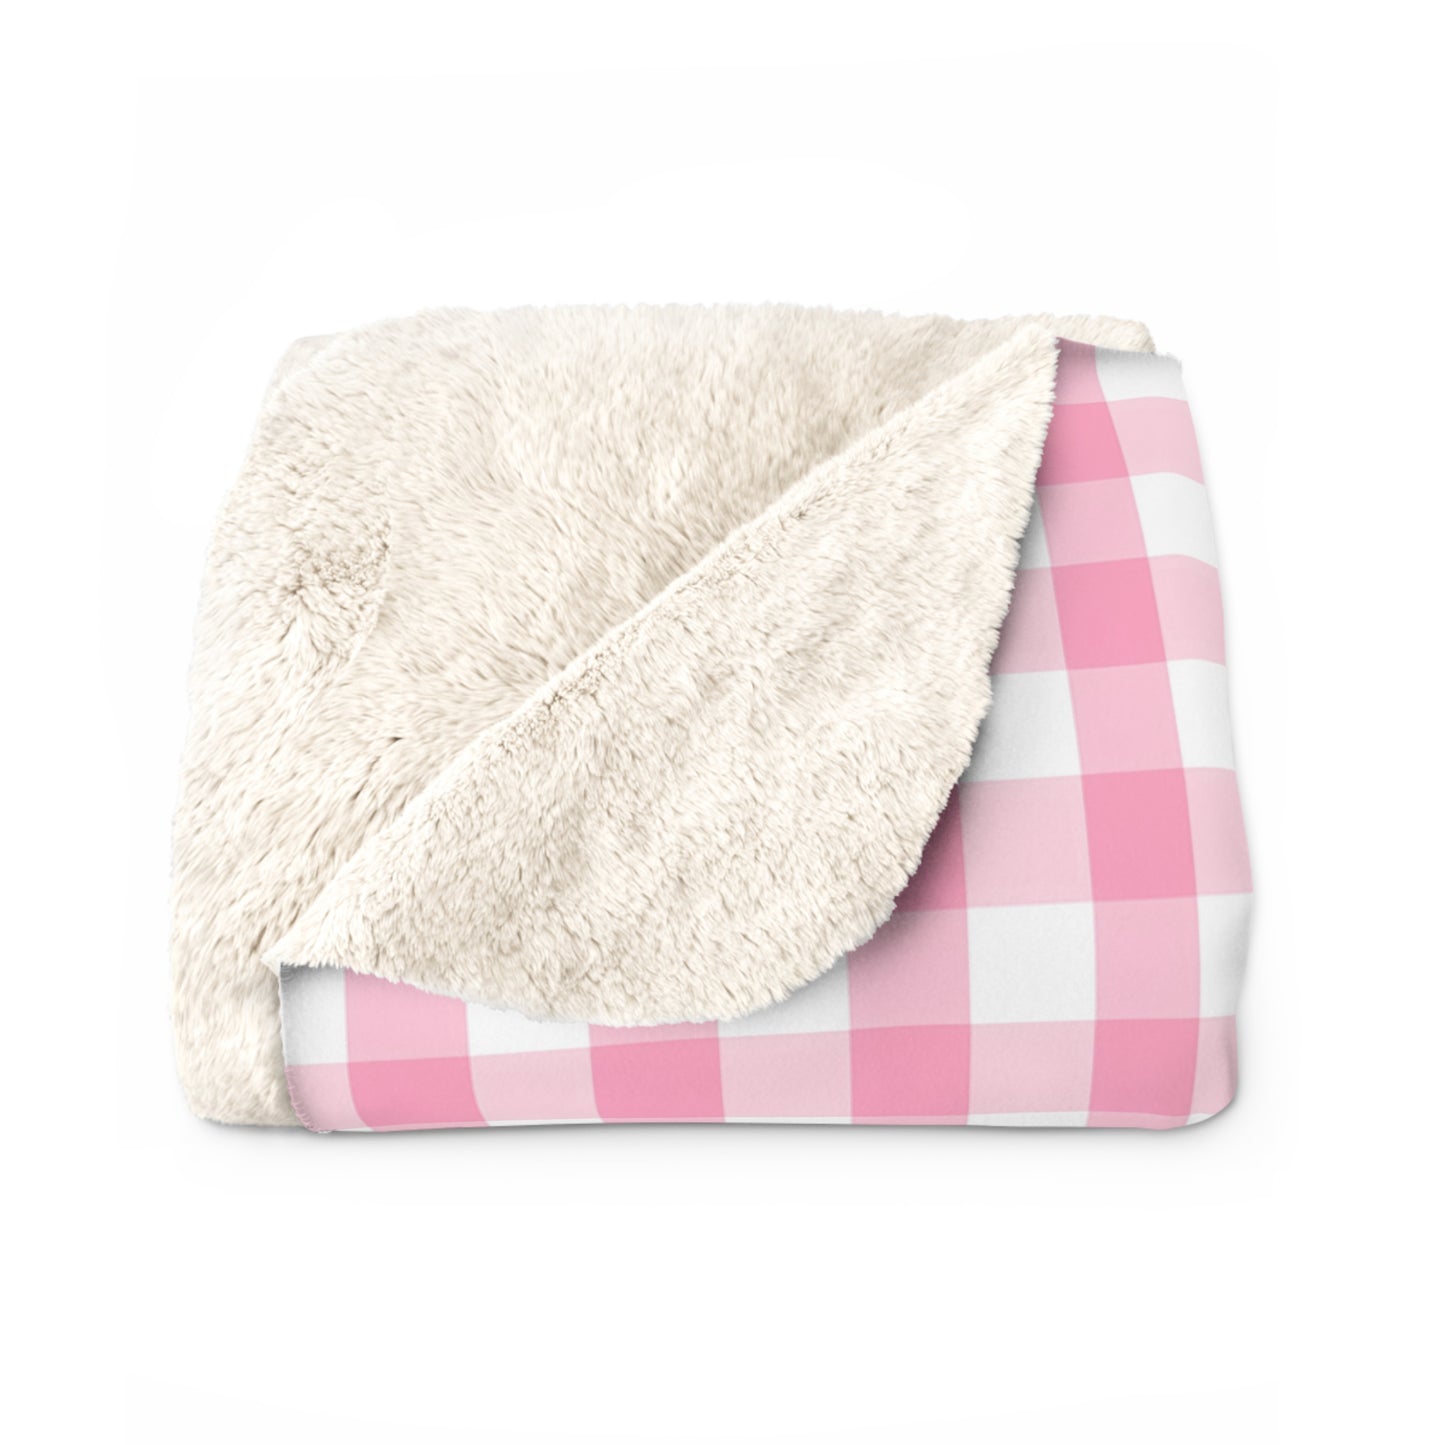 Pour Yourself A Cup of Ambition Sherpa Fleece Blanket